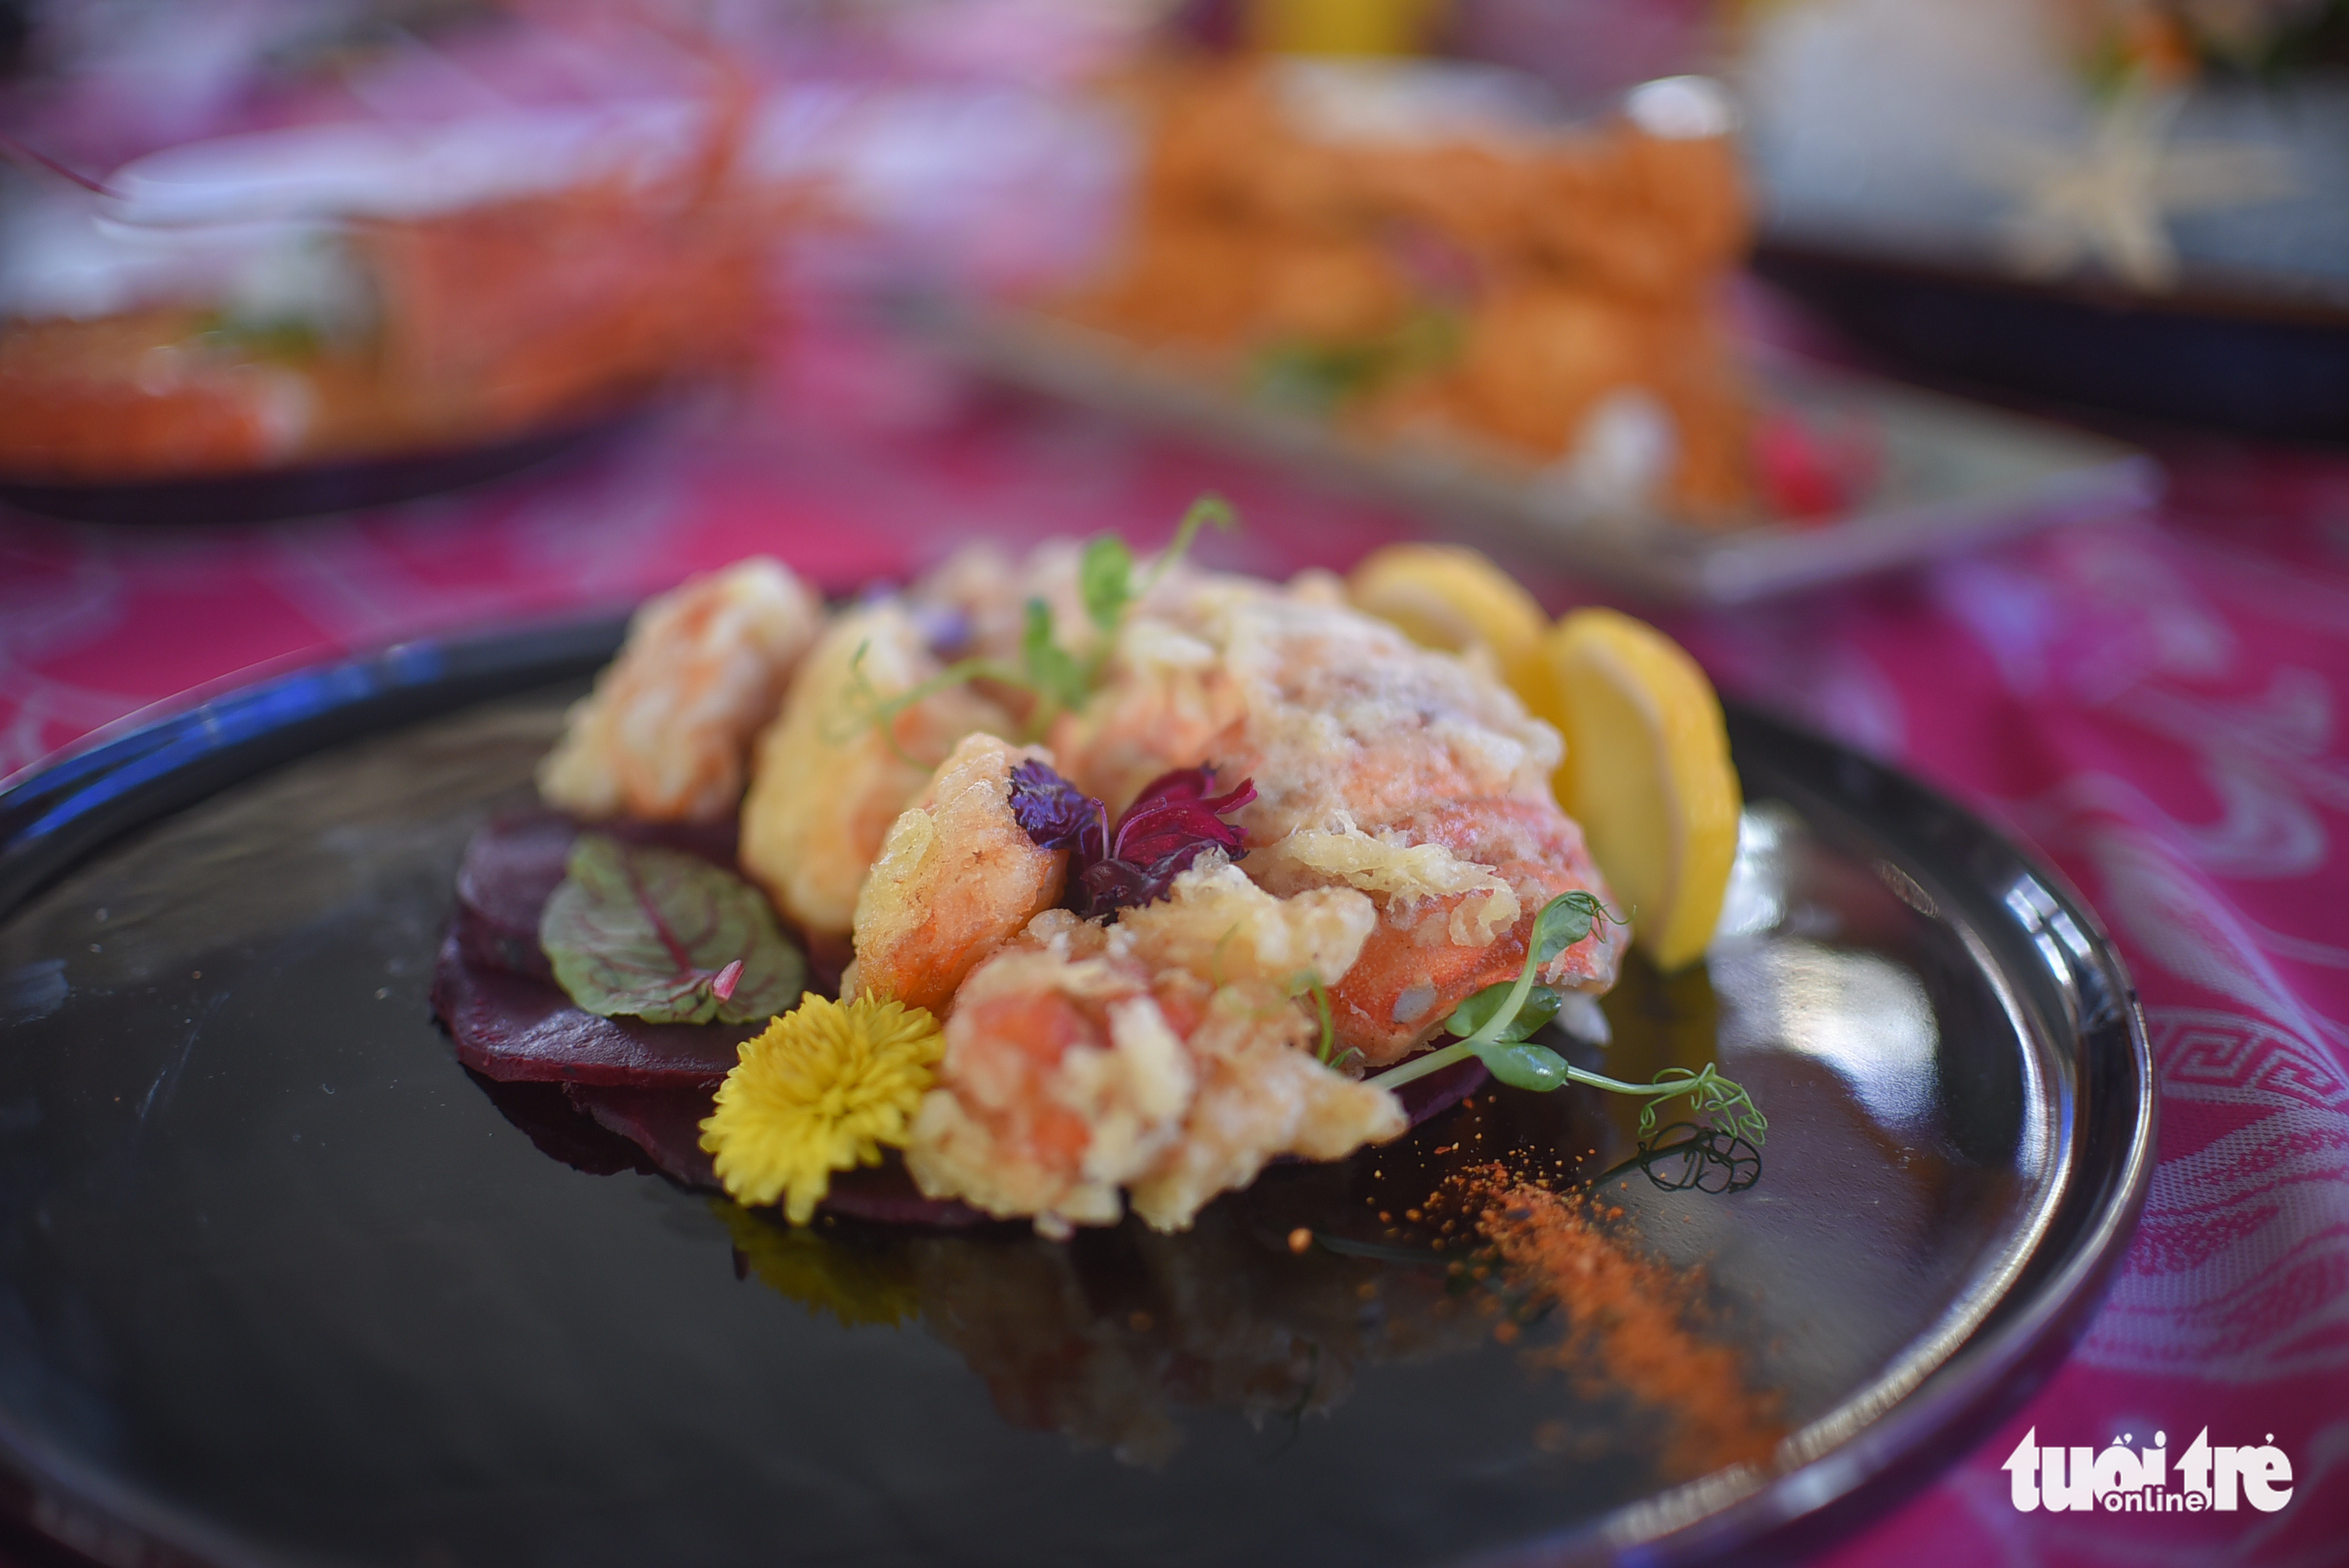 A lobster dish at a culinary contest in Phu Yen Province, Vietnam, July 31, 2022. Photo: Lam Thien / Tuoi Tre